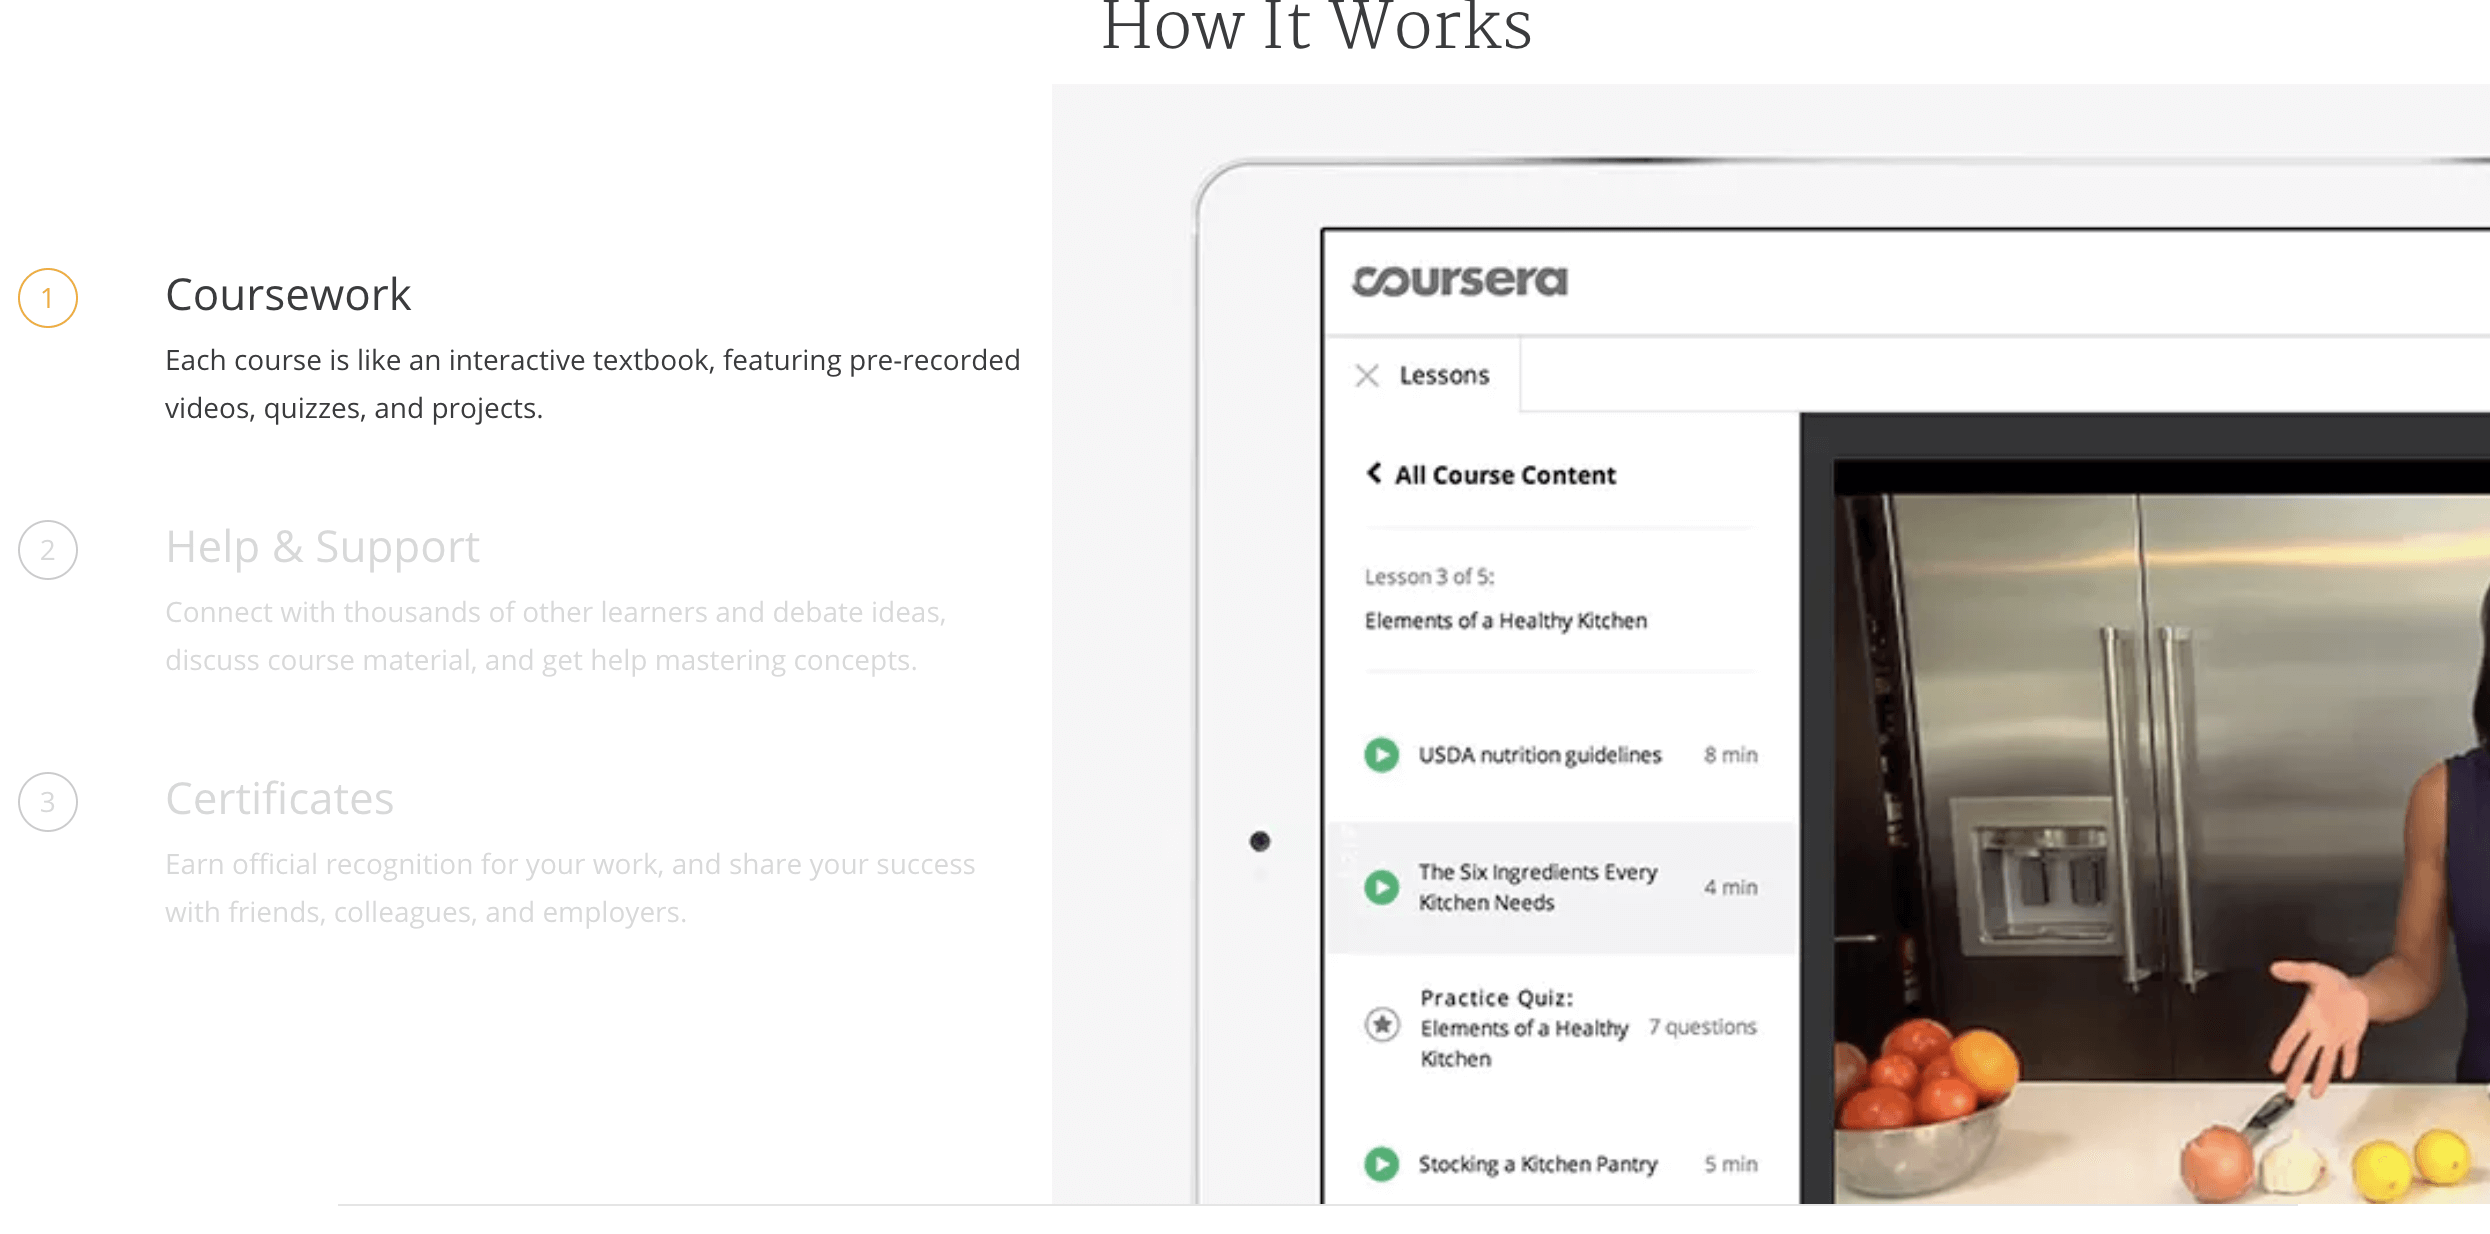 How it works section on Coursera's website